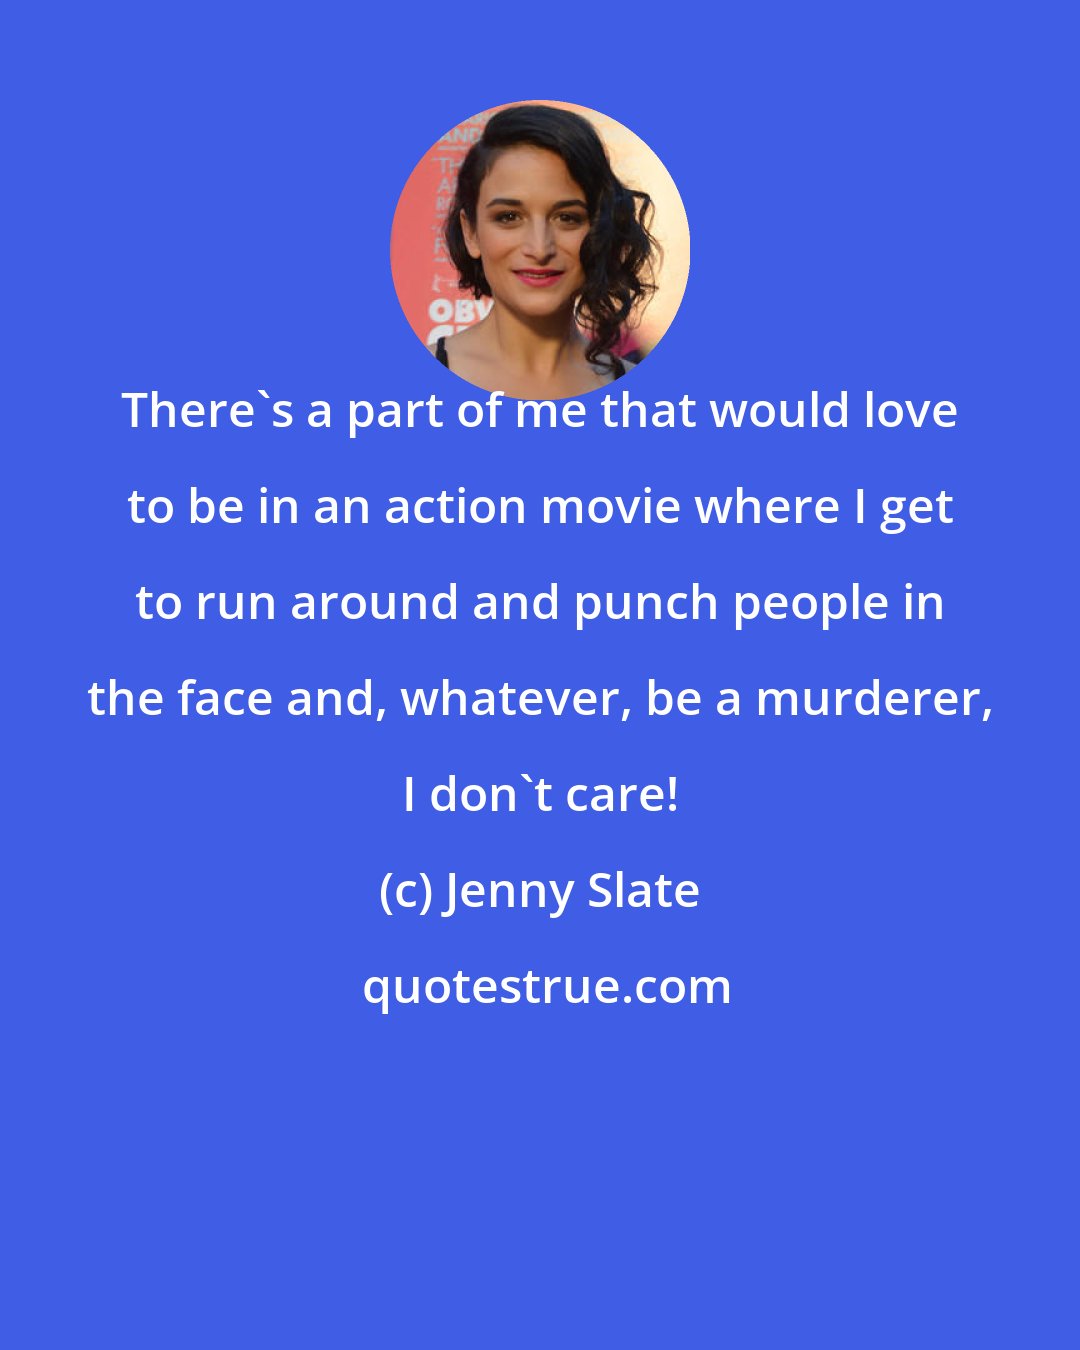 Jenny Slate: There's a part of me that would love to be in an action movie where I get to run around and punch people in the face and, whatever, be a murderer, I don't care!